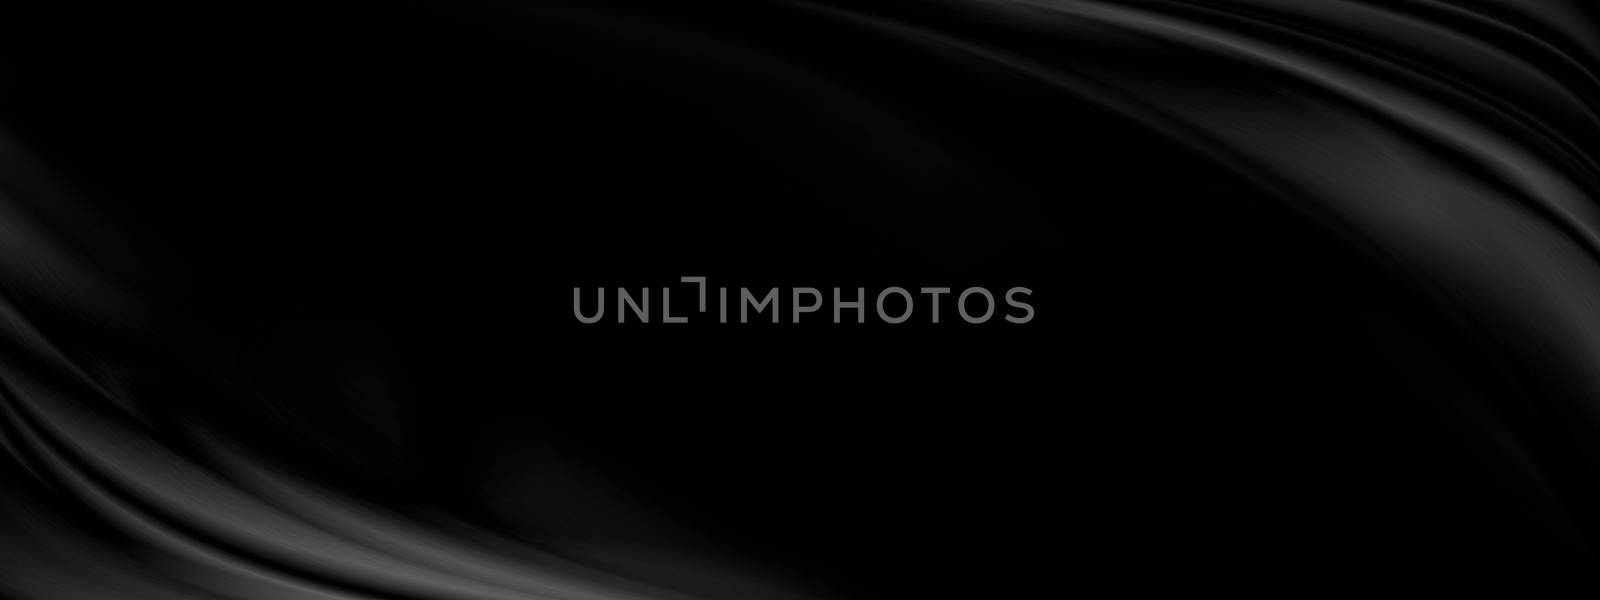 Black fabric background with copy space illustration